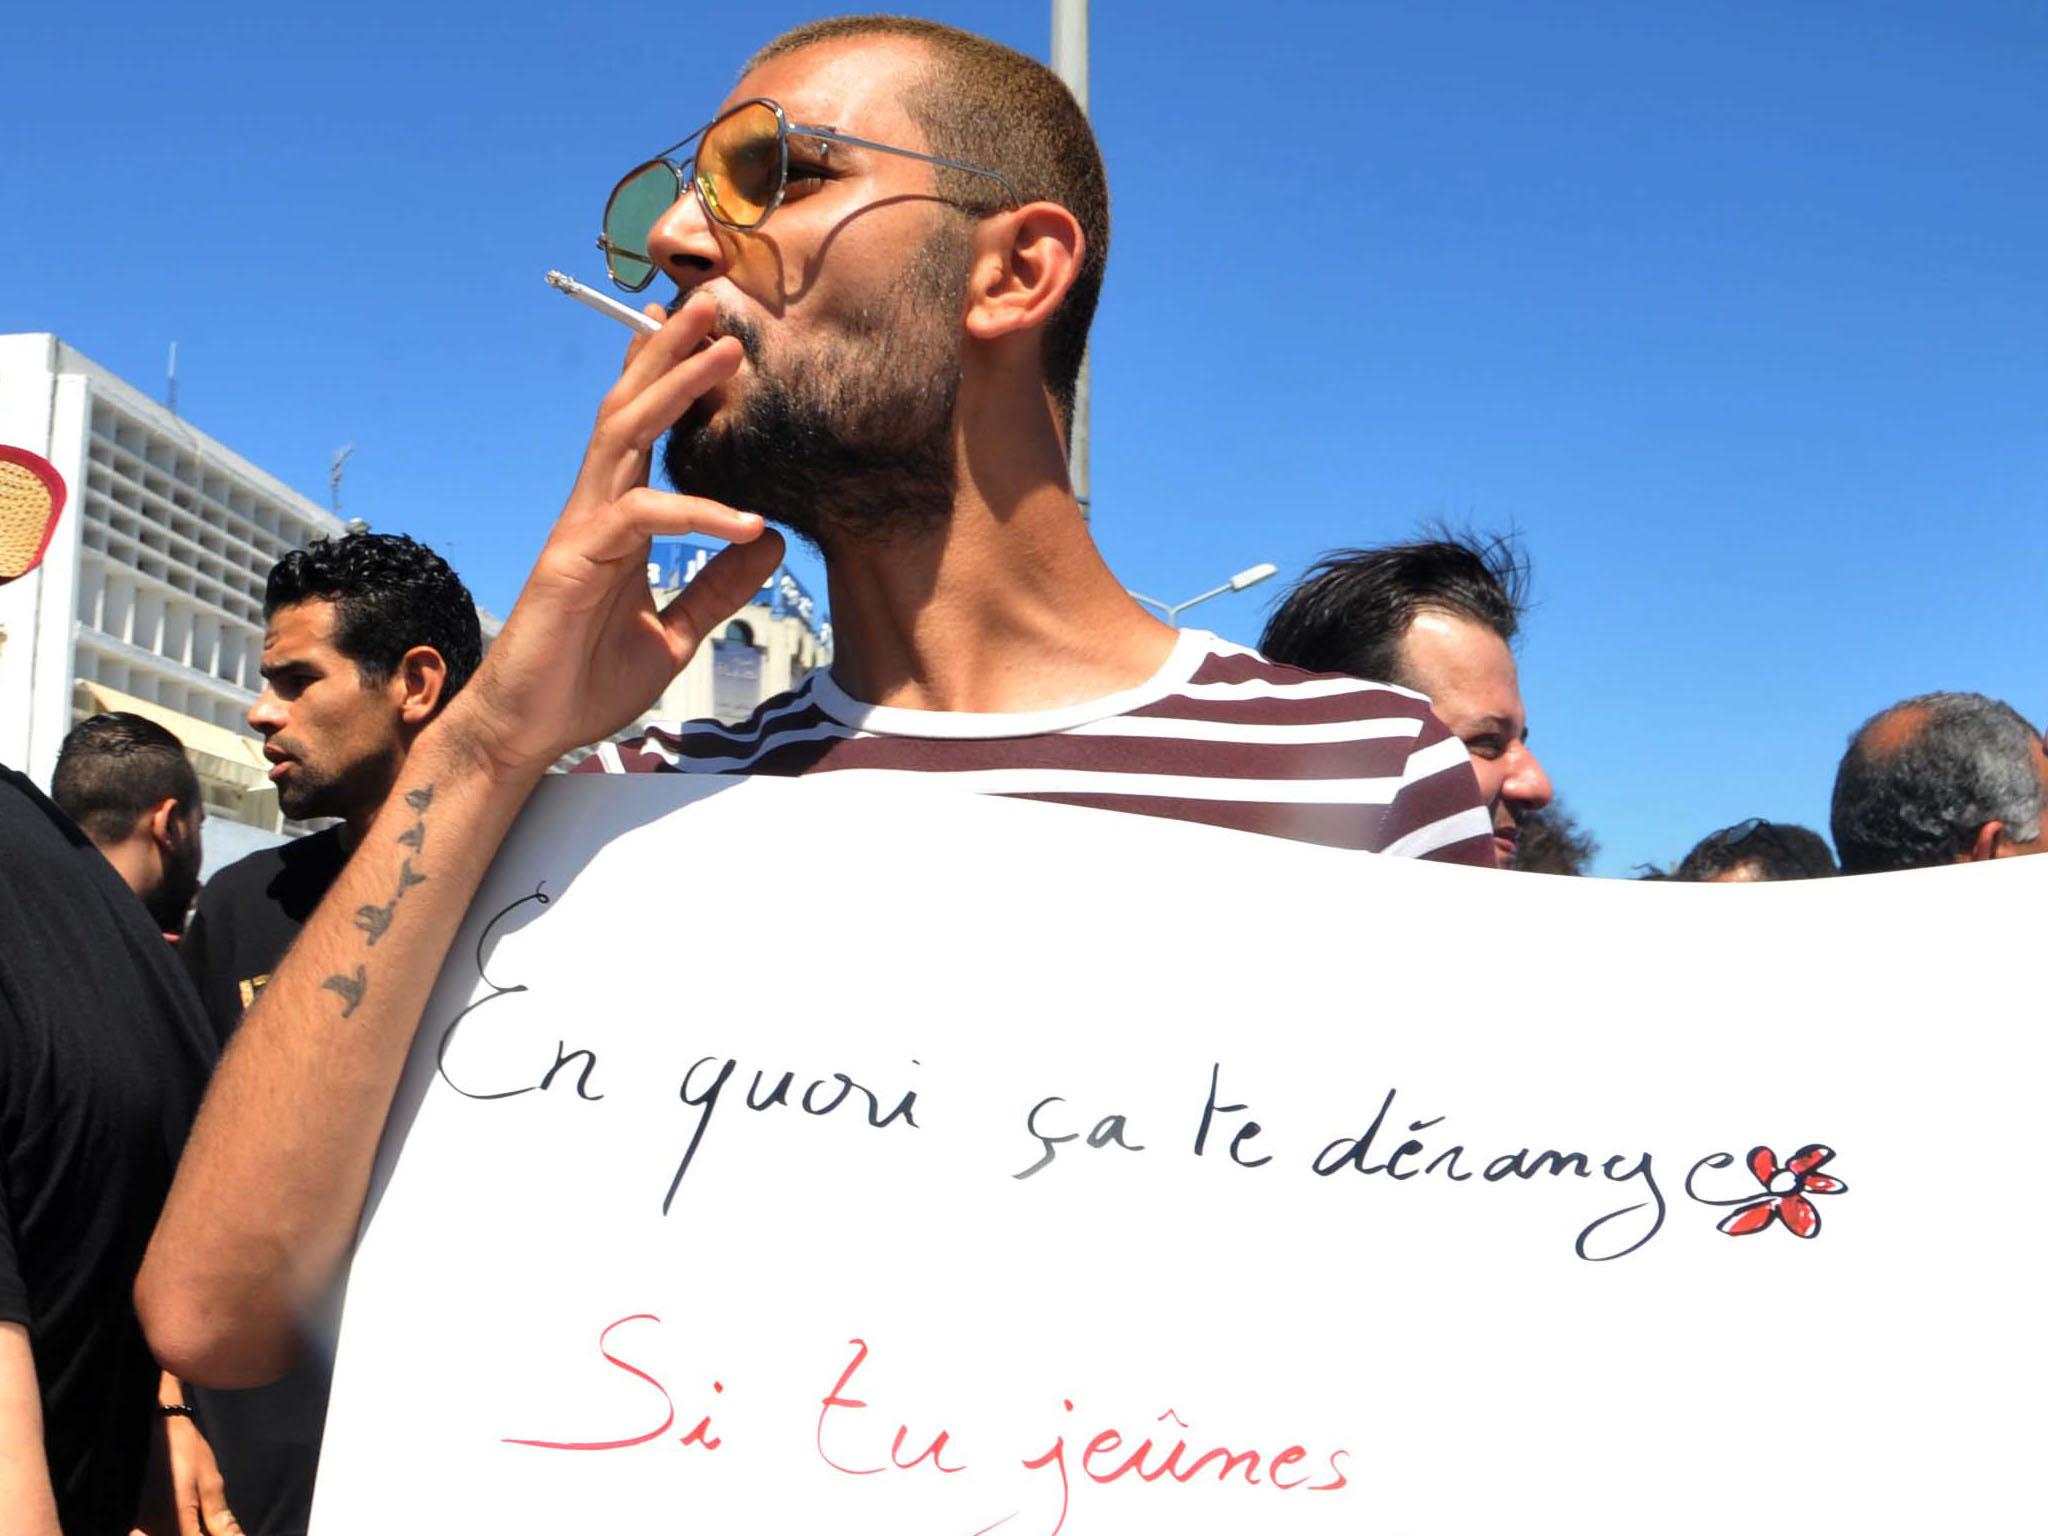 A Tunisian protester smoked a cigarette and held a placard reading "Why is it bothering you?"